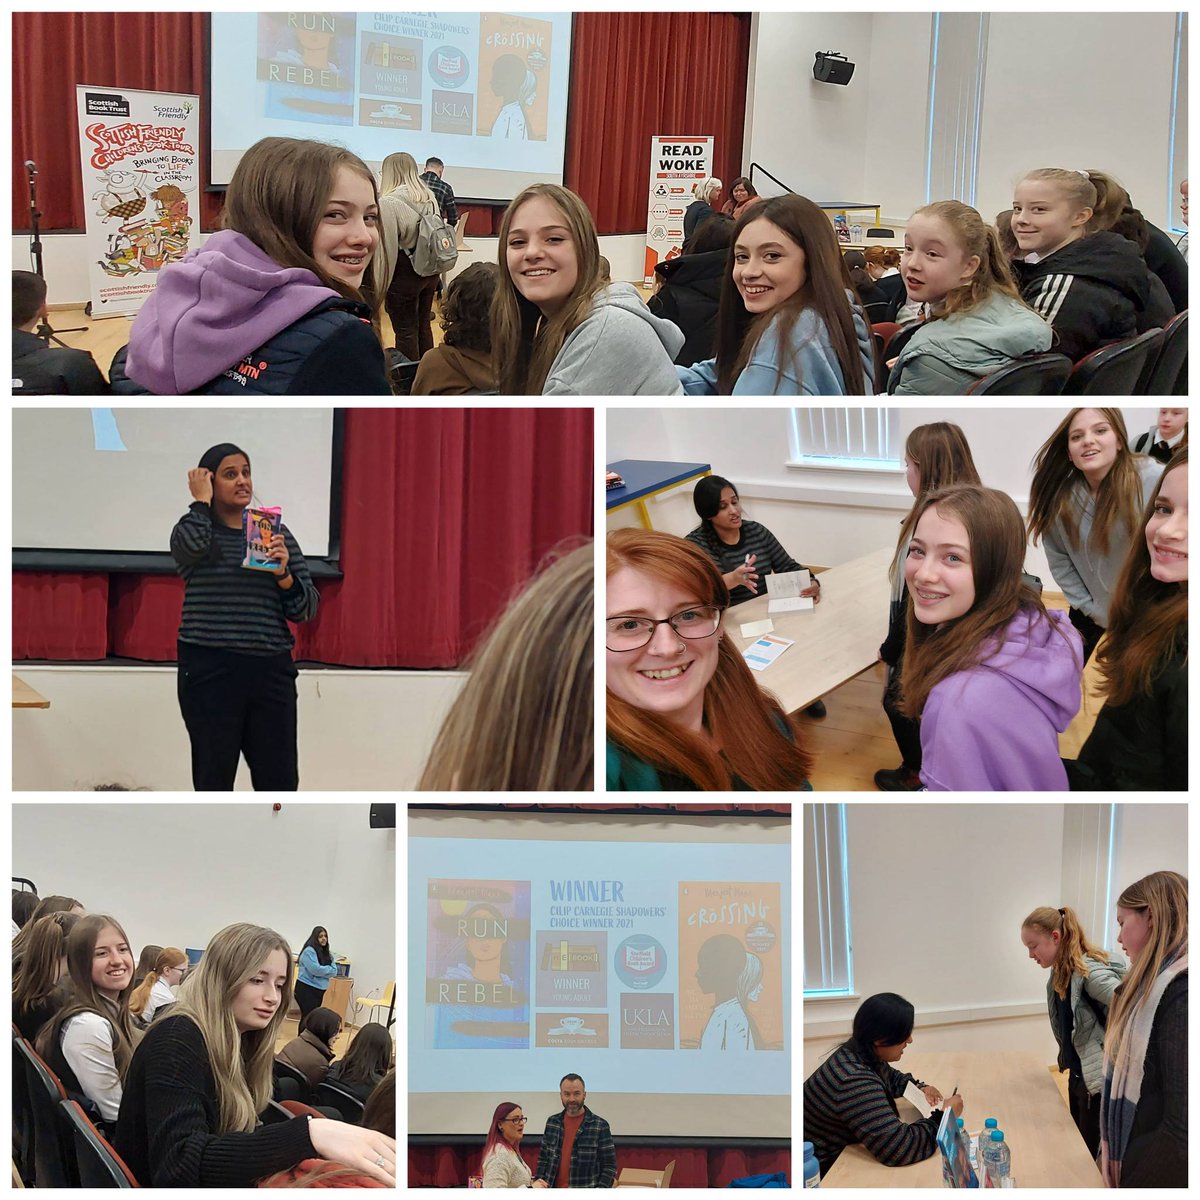 @girvanacademy pupils had a brilliant day out listening to @ManjeetMann speak about her books 'Run Rebel' and 'The Crossing' at @pwkacademy with @scottishbktrust. #girvanreads #readwoke